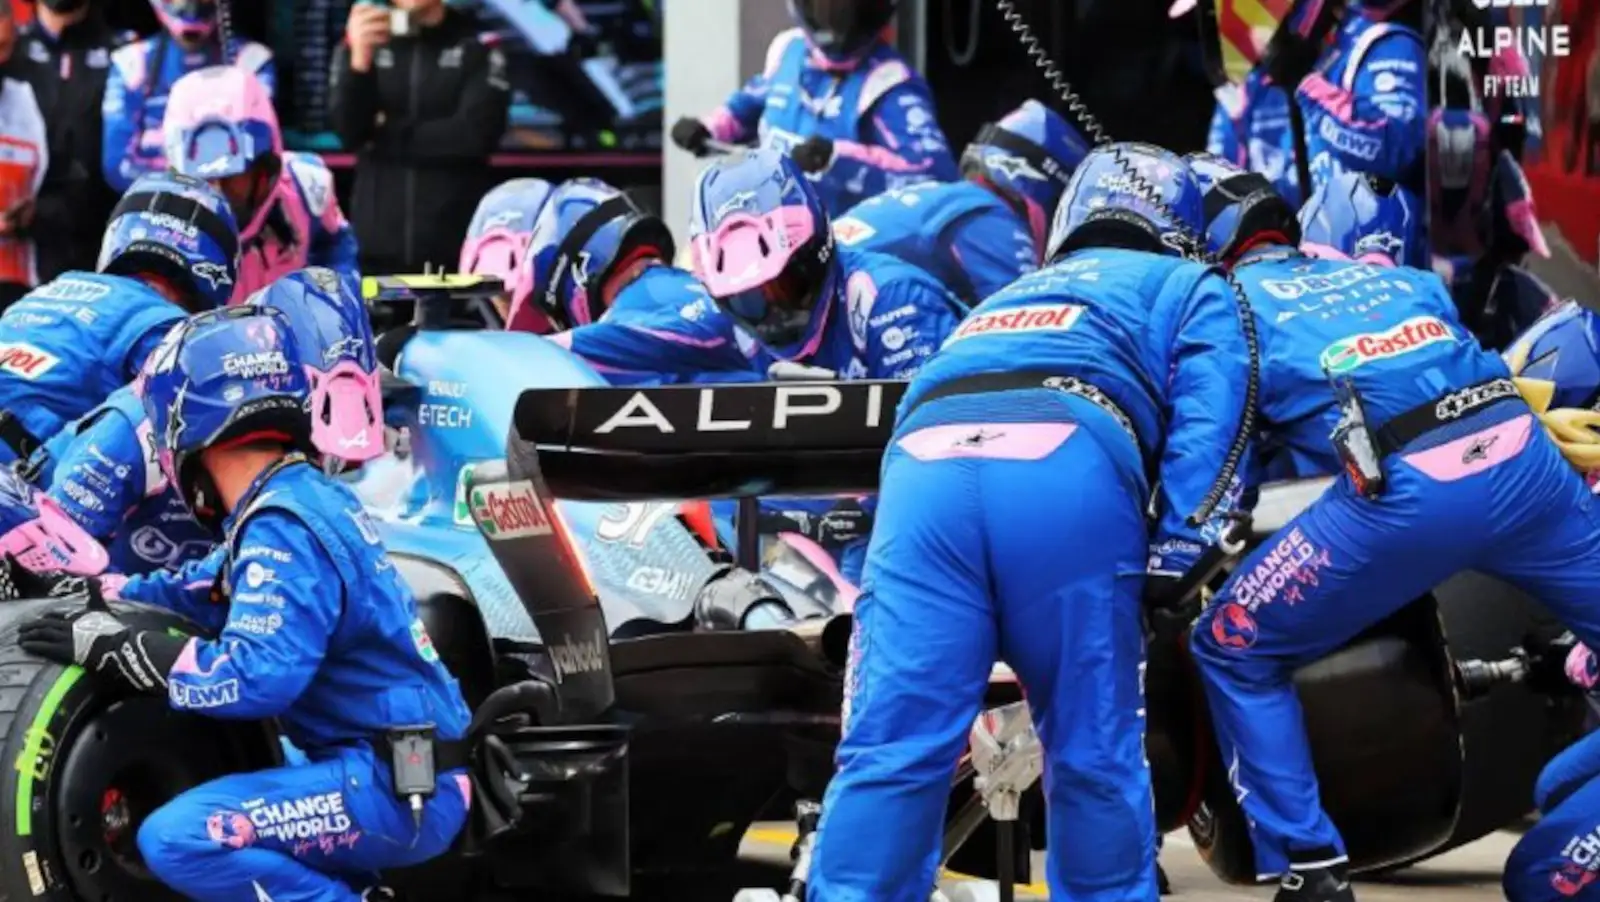 Esteban Ocon surrounded by his mechanics as he makes a pit stop. Imola April 2022